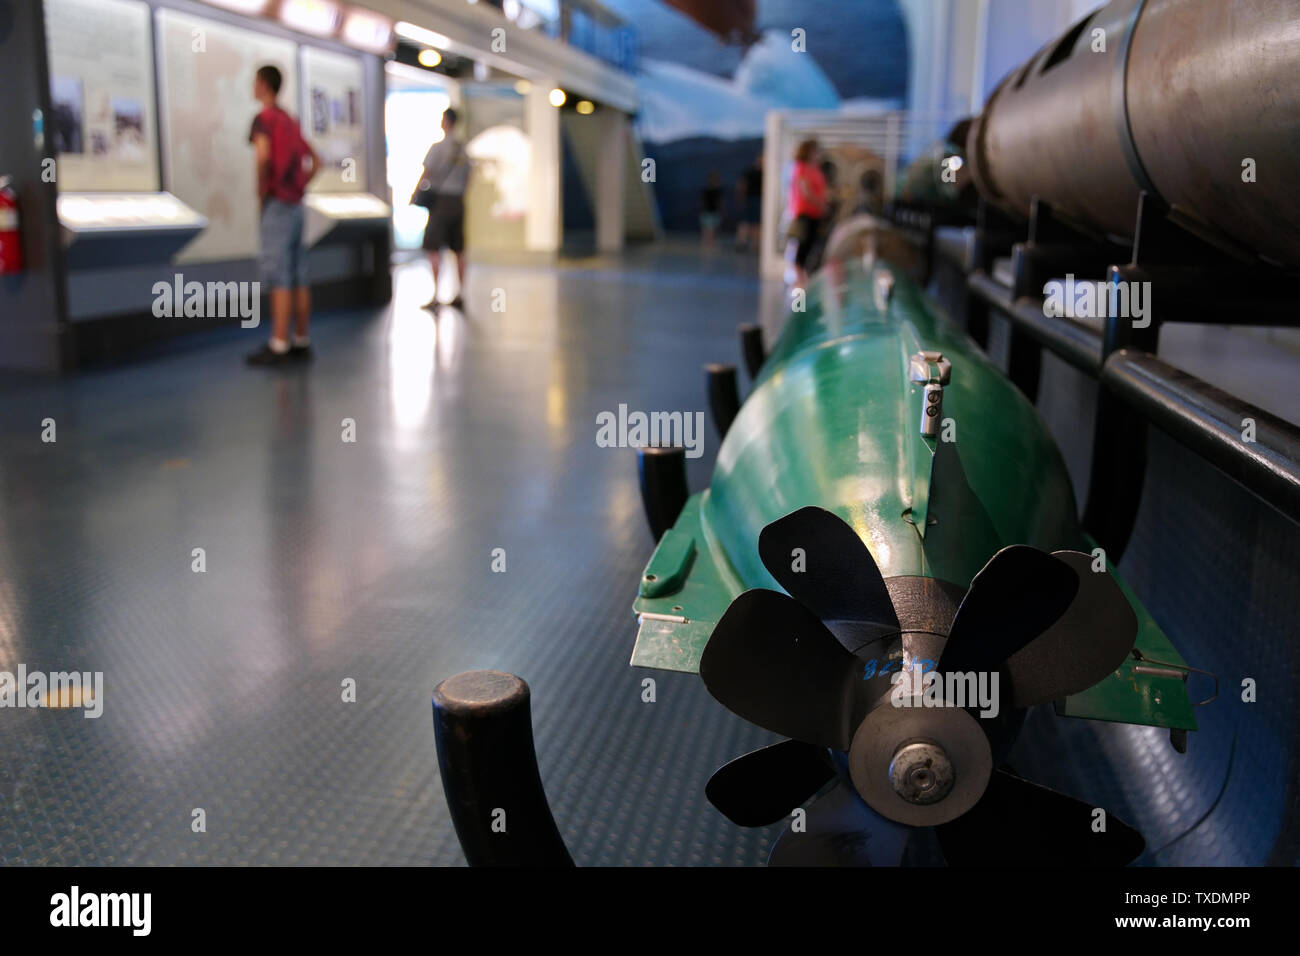 Submarine Force Museum, Groton CT USA, Jun 2019. Inside with photos, exhibits, and replicas leading to the evolution of the modern attack submarine. Stock Photo